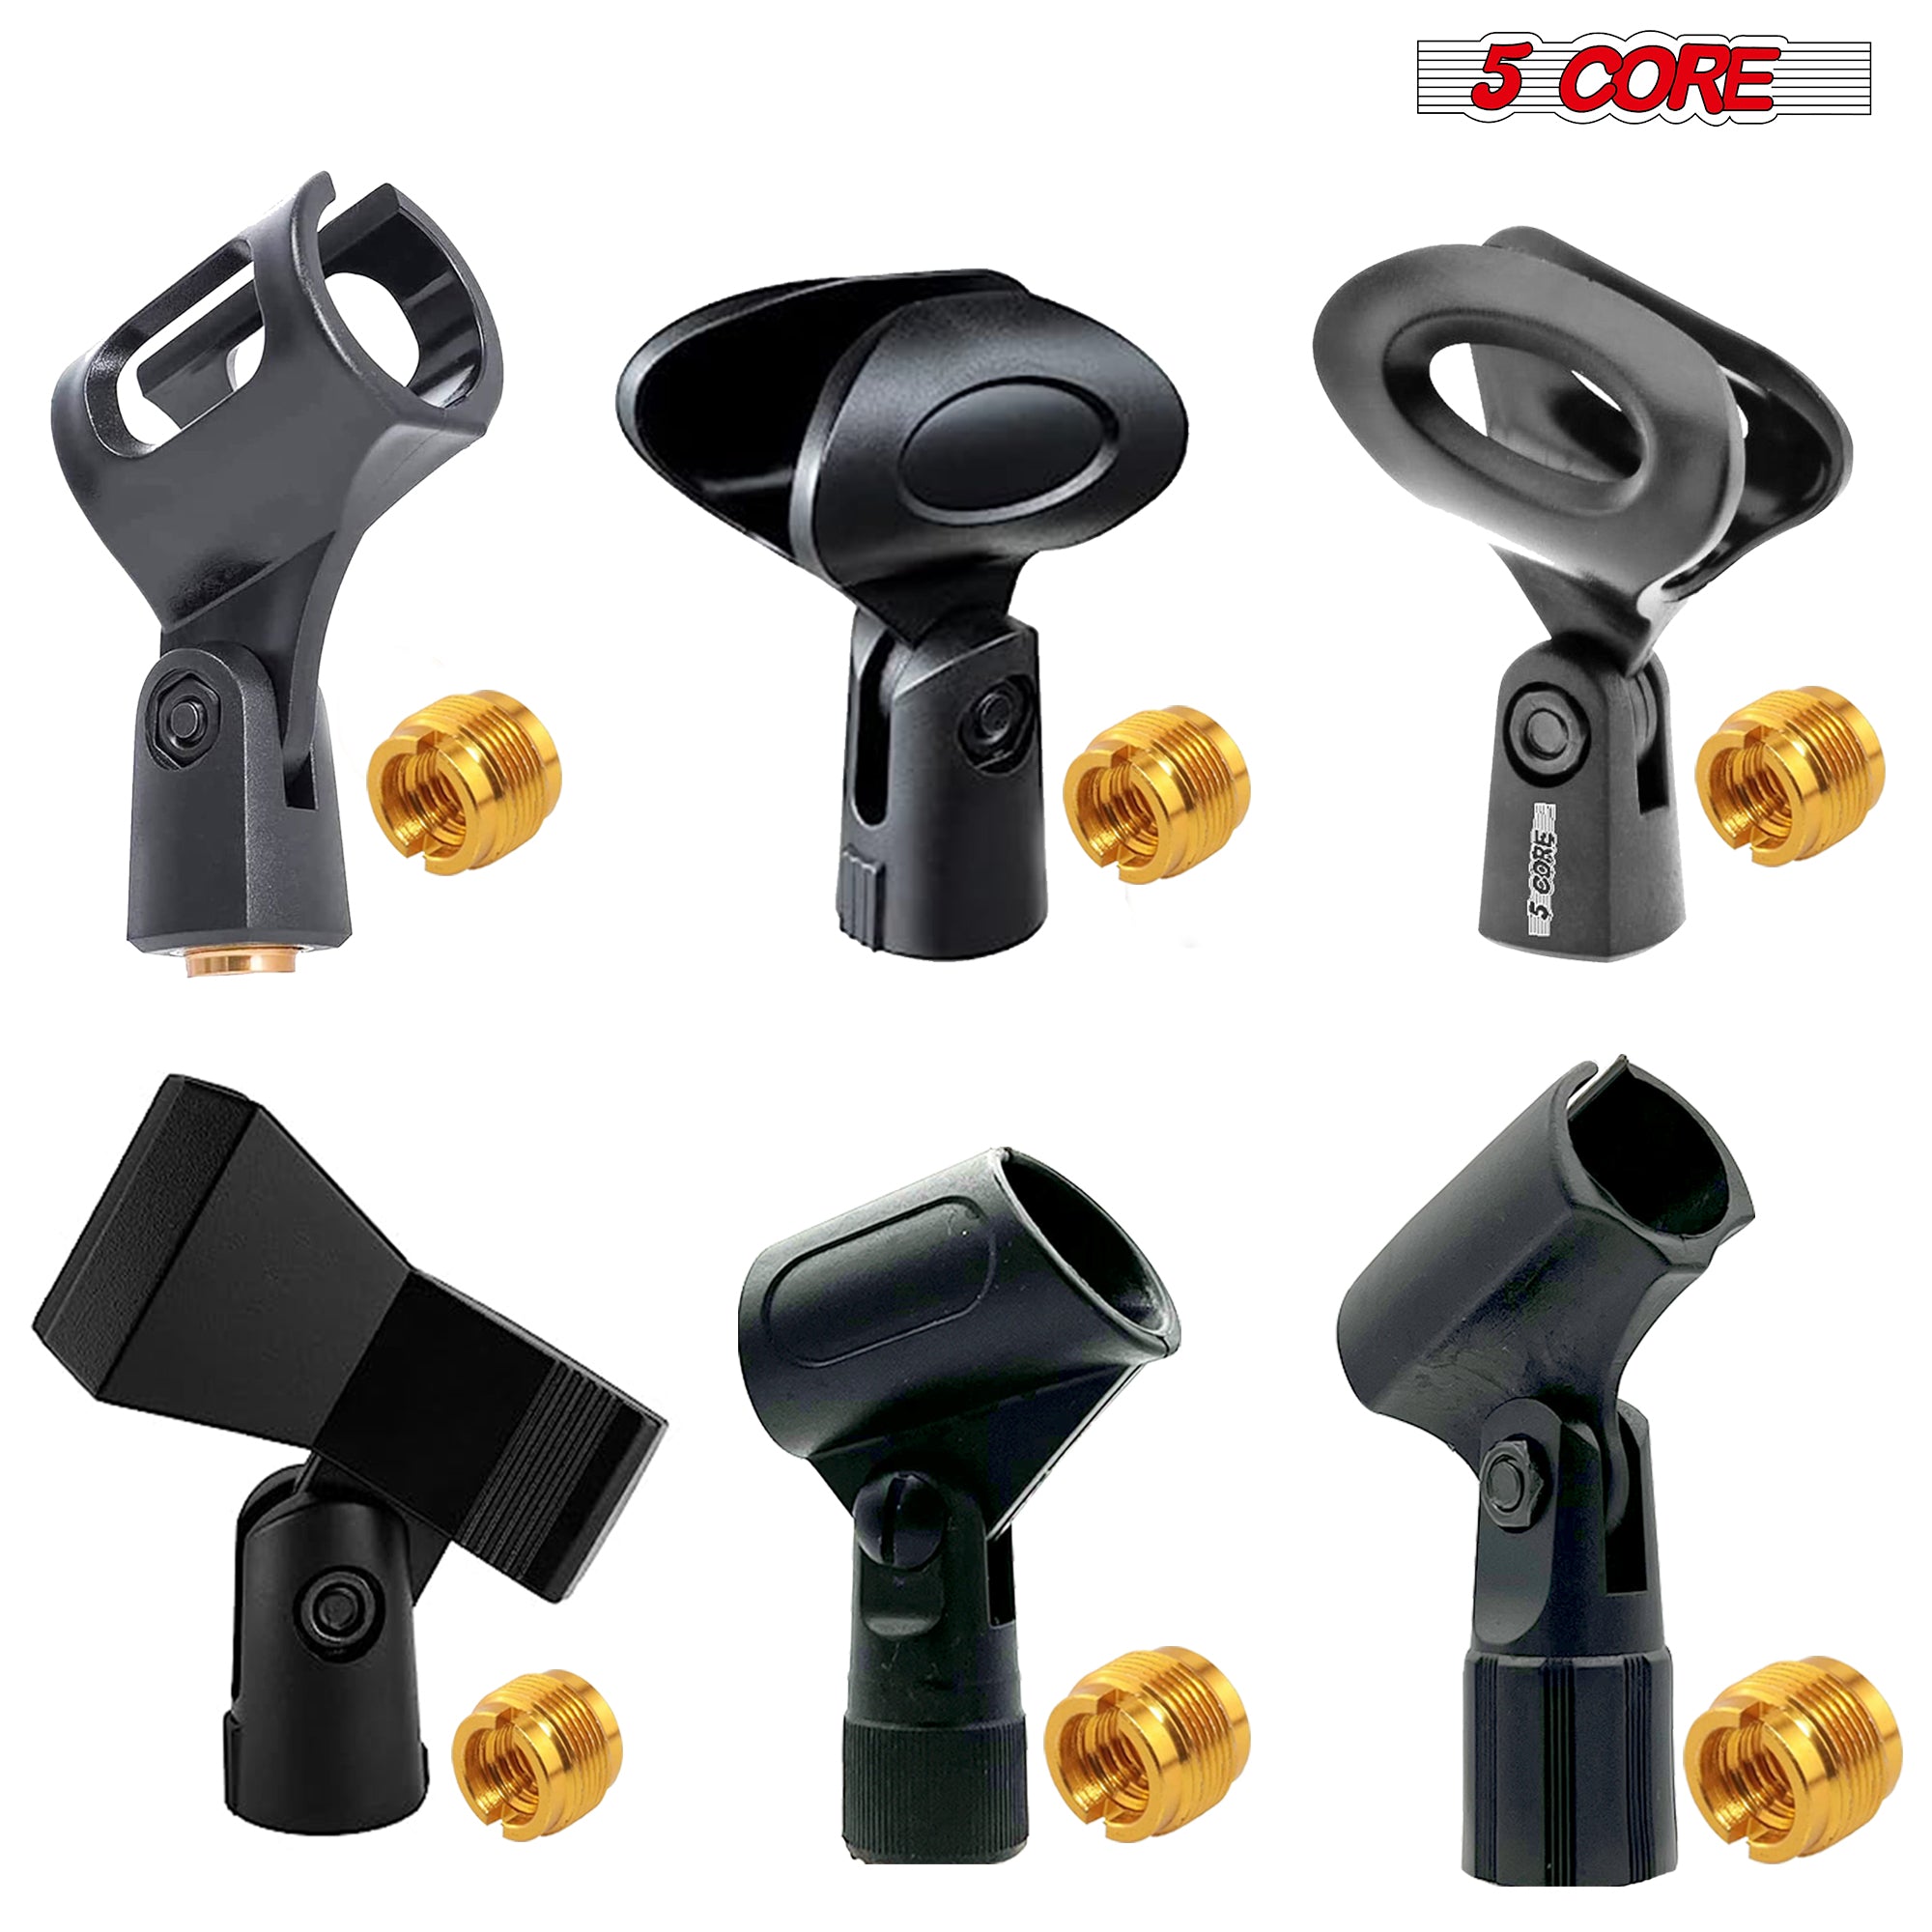 5Core Universal Microphone Clip Holder 6Pack Mic Mount w Gold Plated 5/8" - 3/8" Screw Adapter